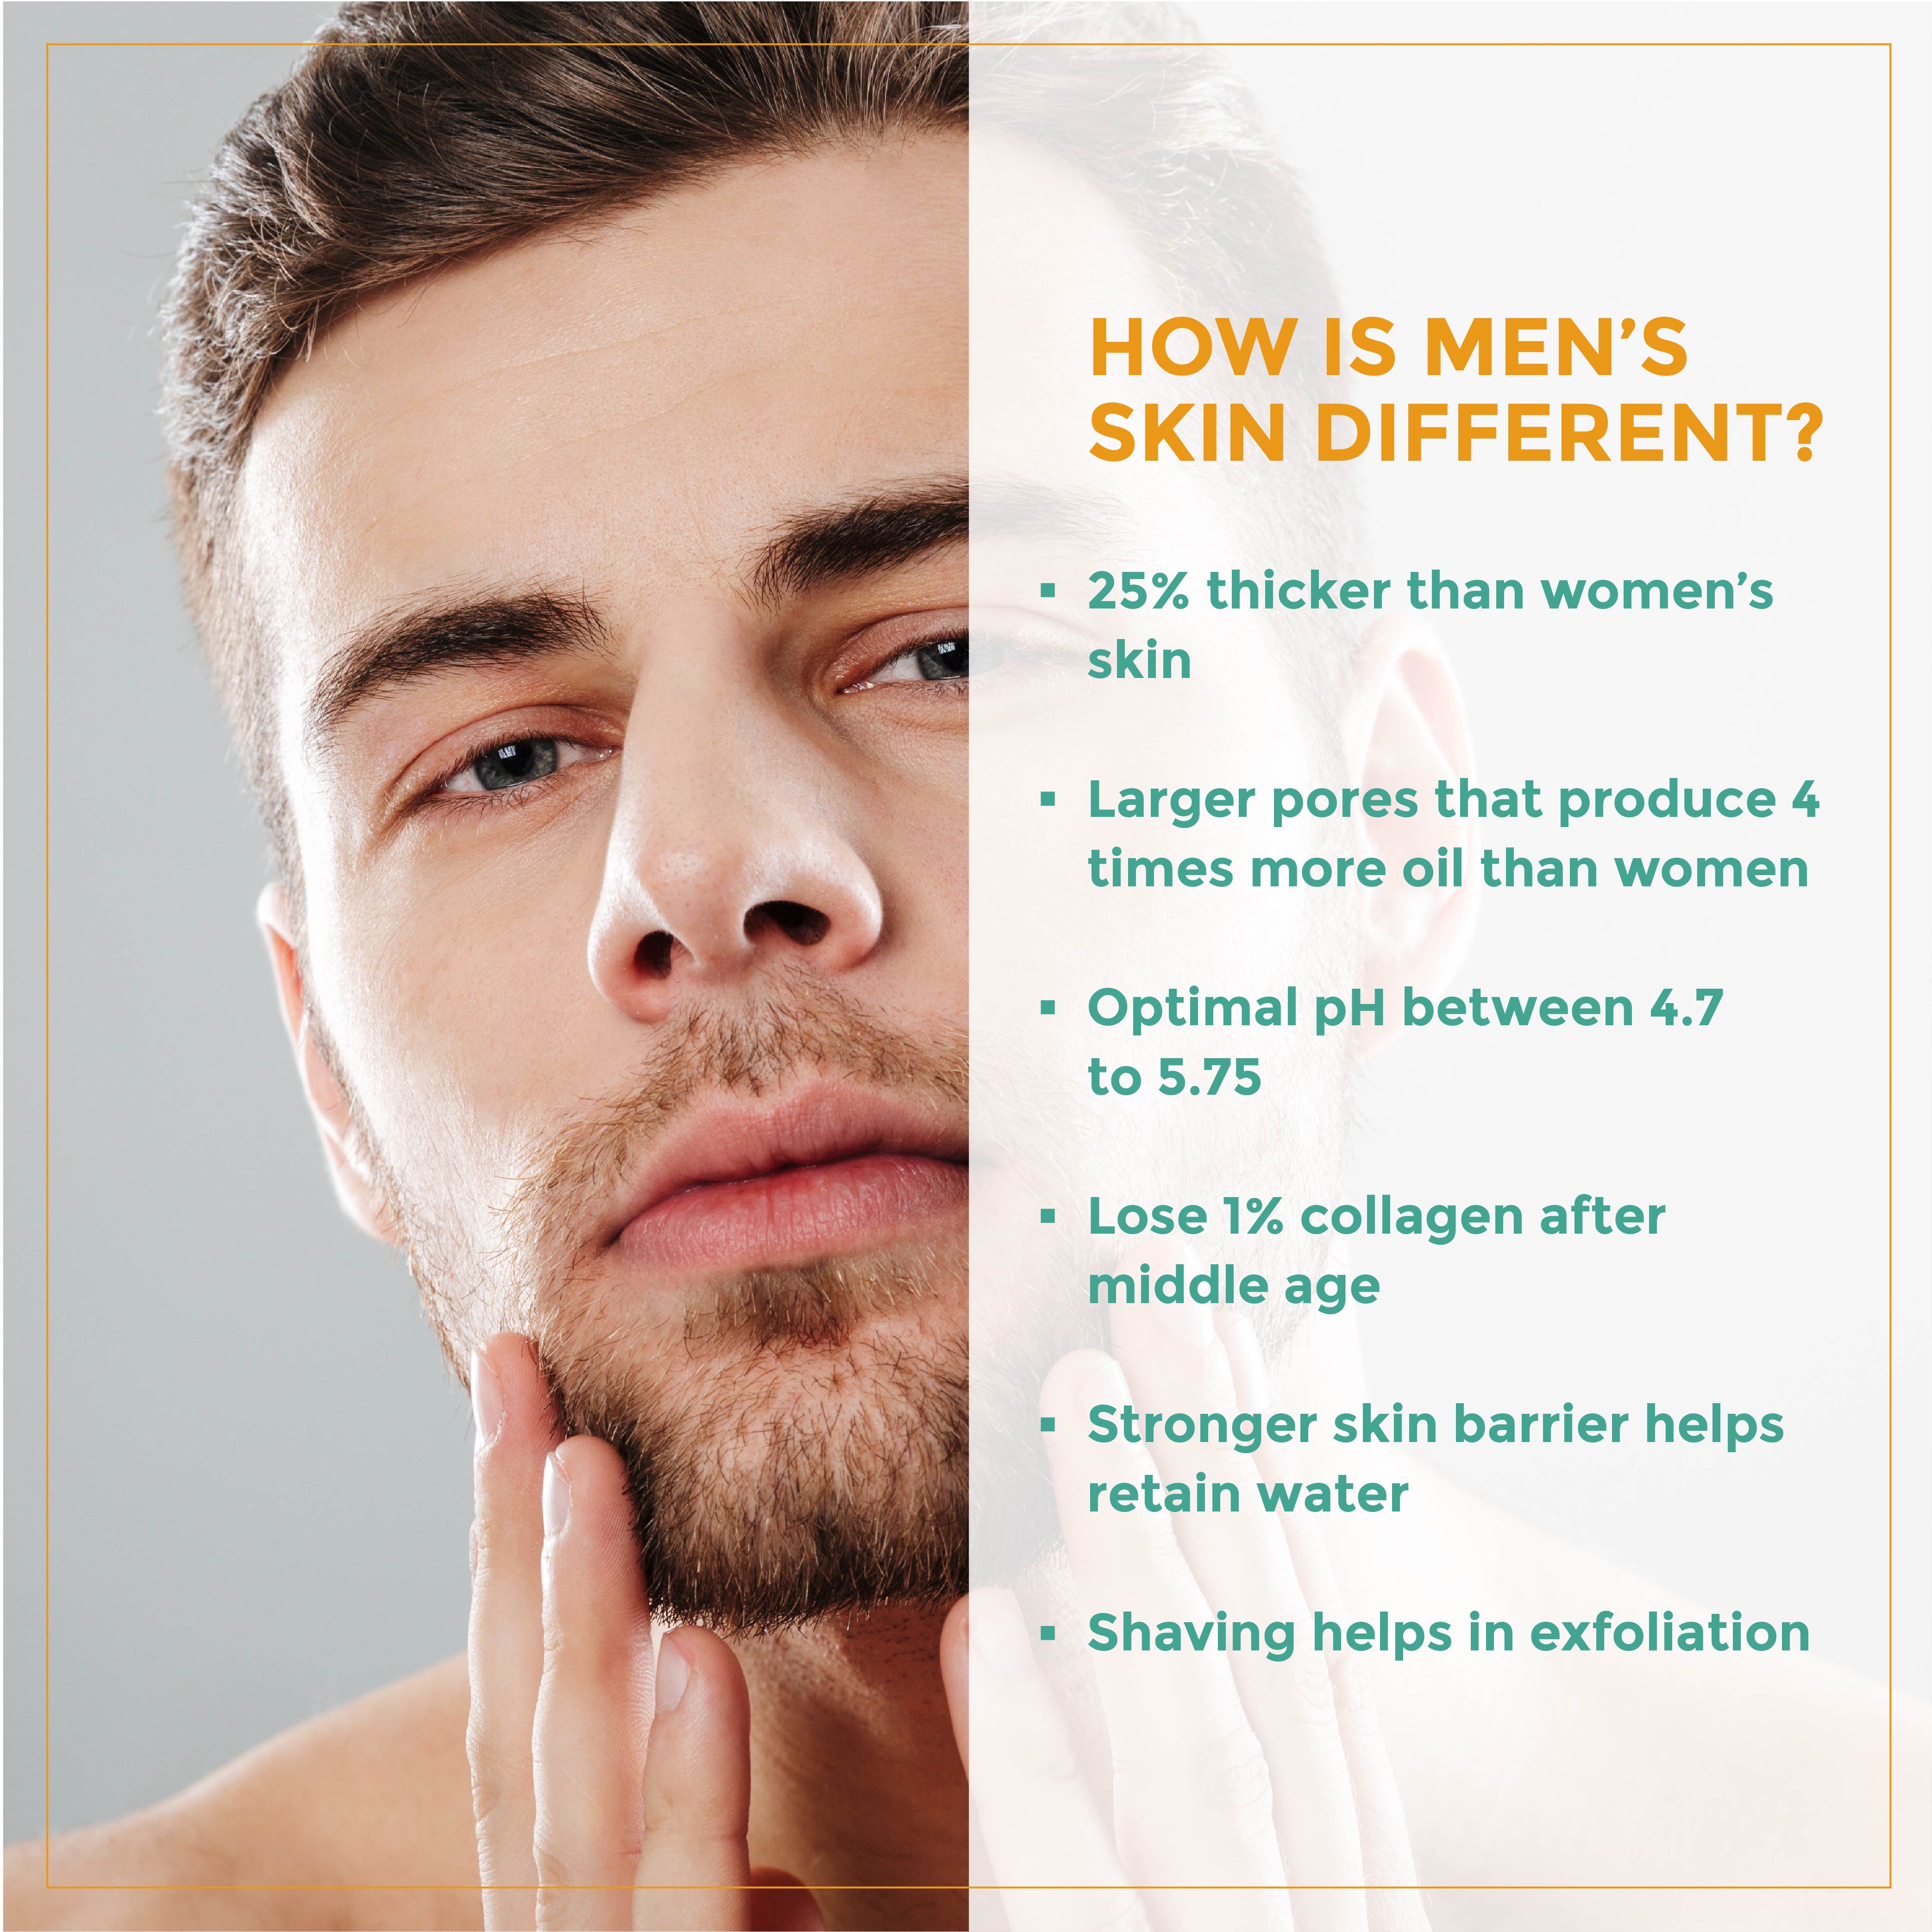 This is an image of how men's skin is different